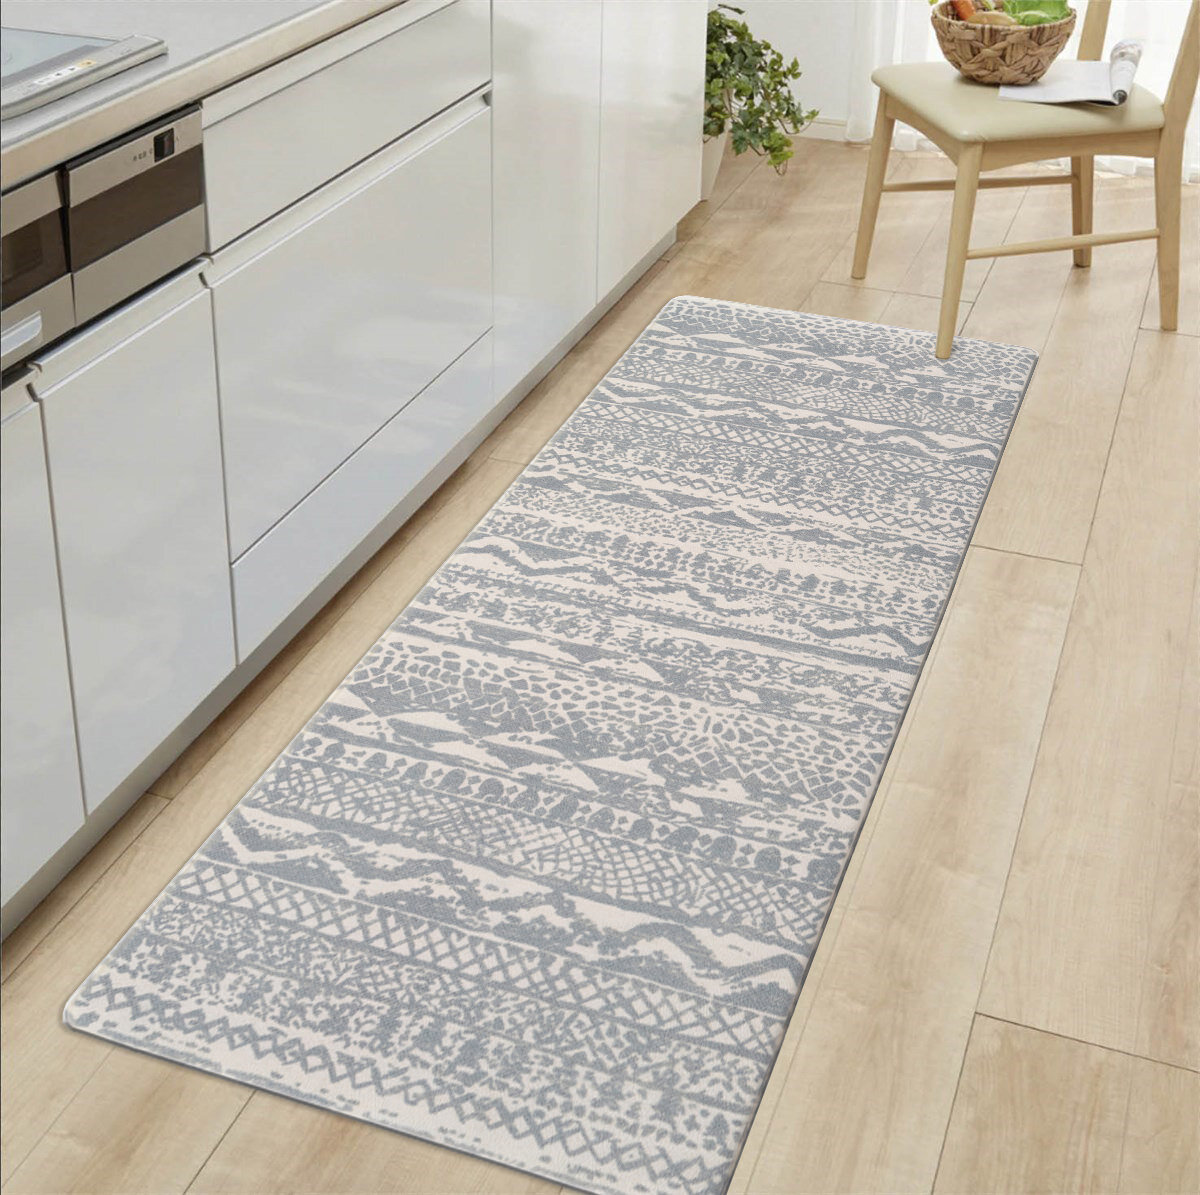 Blue 18 in. x 47 in. Modern Large Floral Anti Fatigue Standing Mat